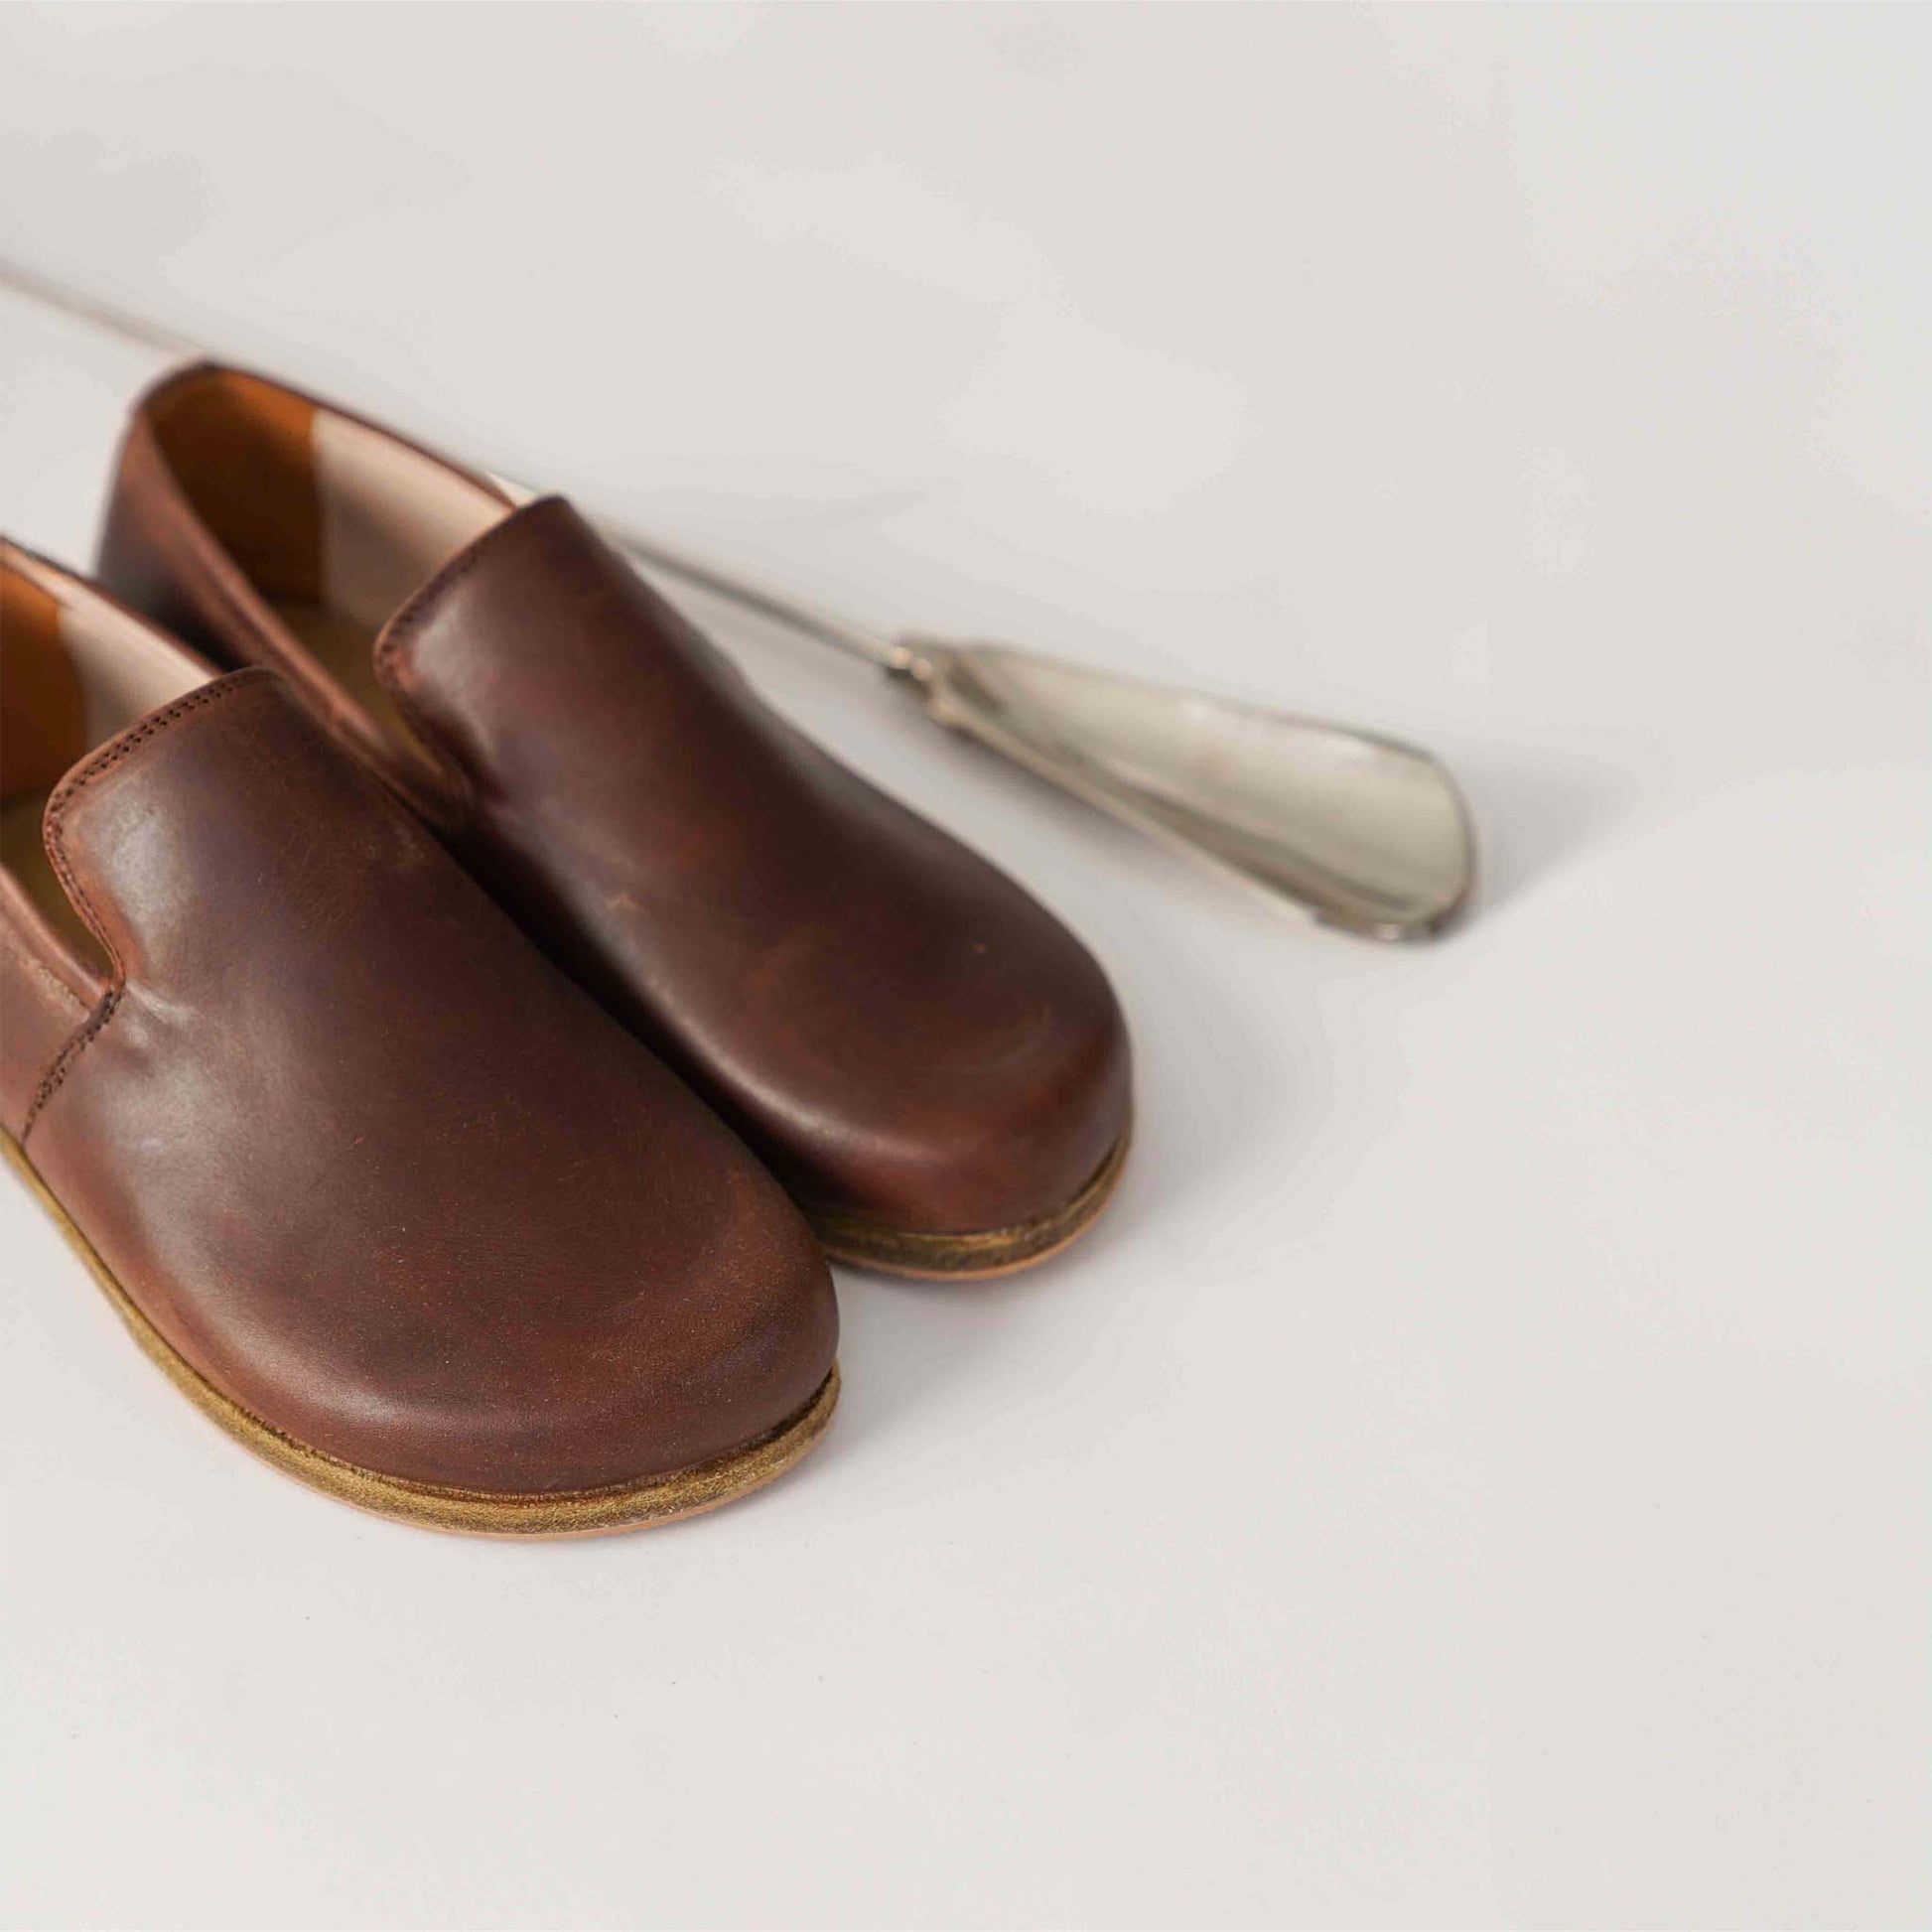 Pair of Aeolia Brown Women Loafers next to a metal shoehorn, showcasing the shoe's high-quality leather and minimalist design.